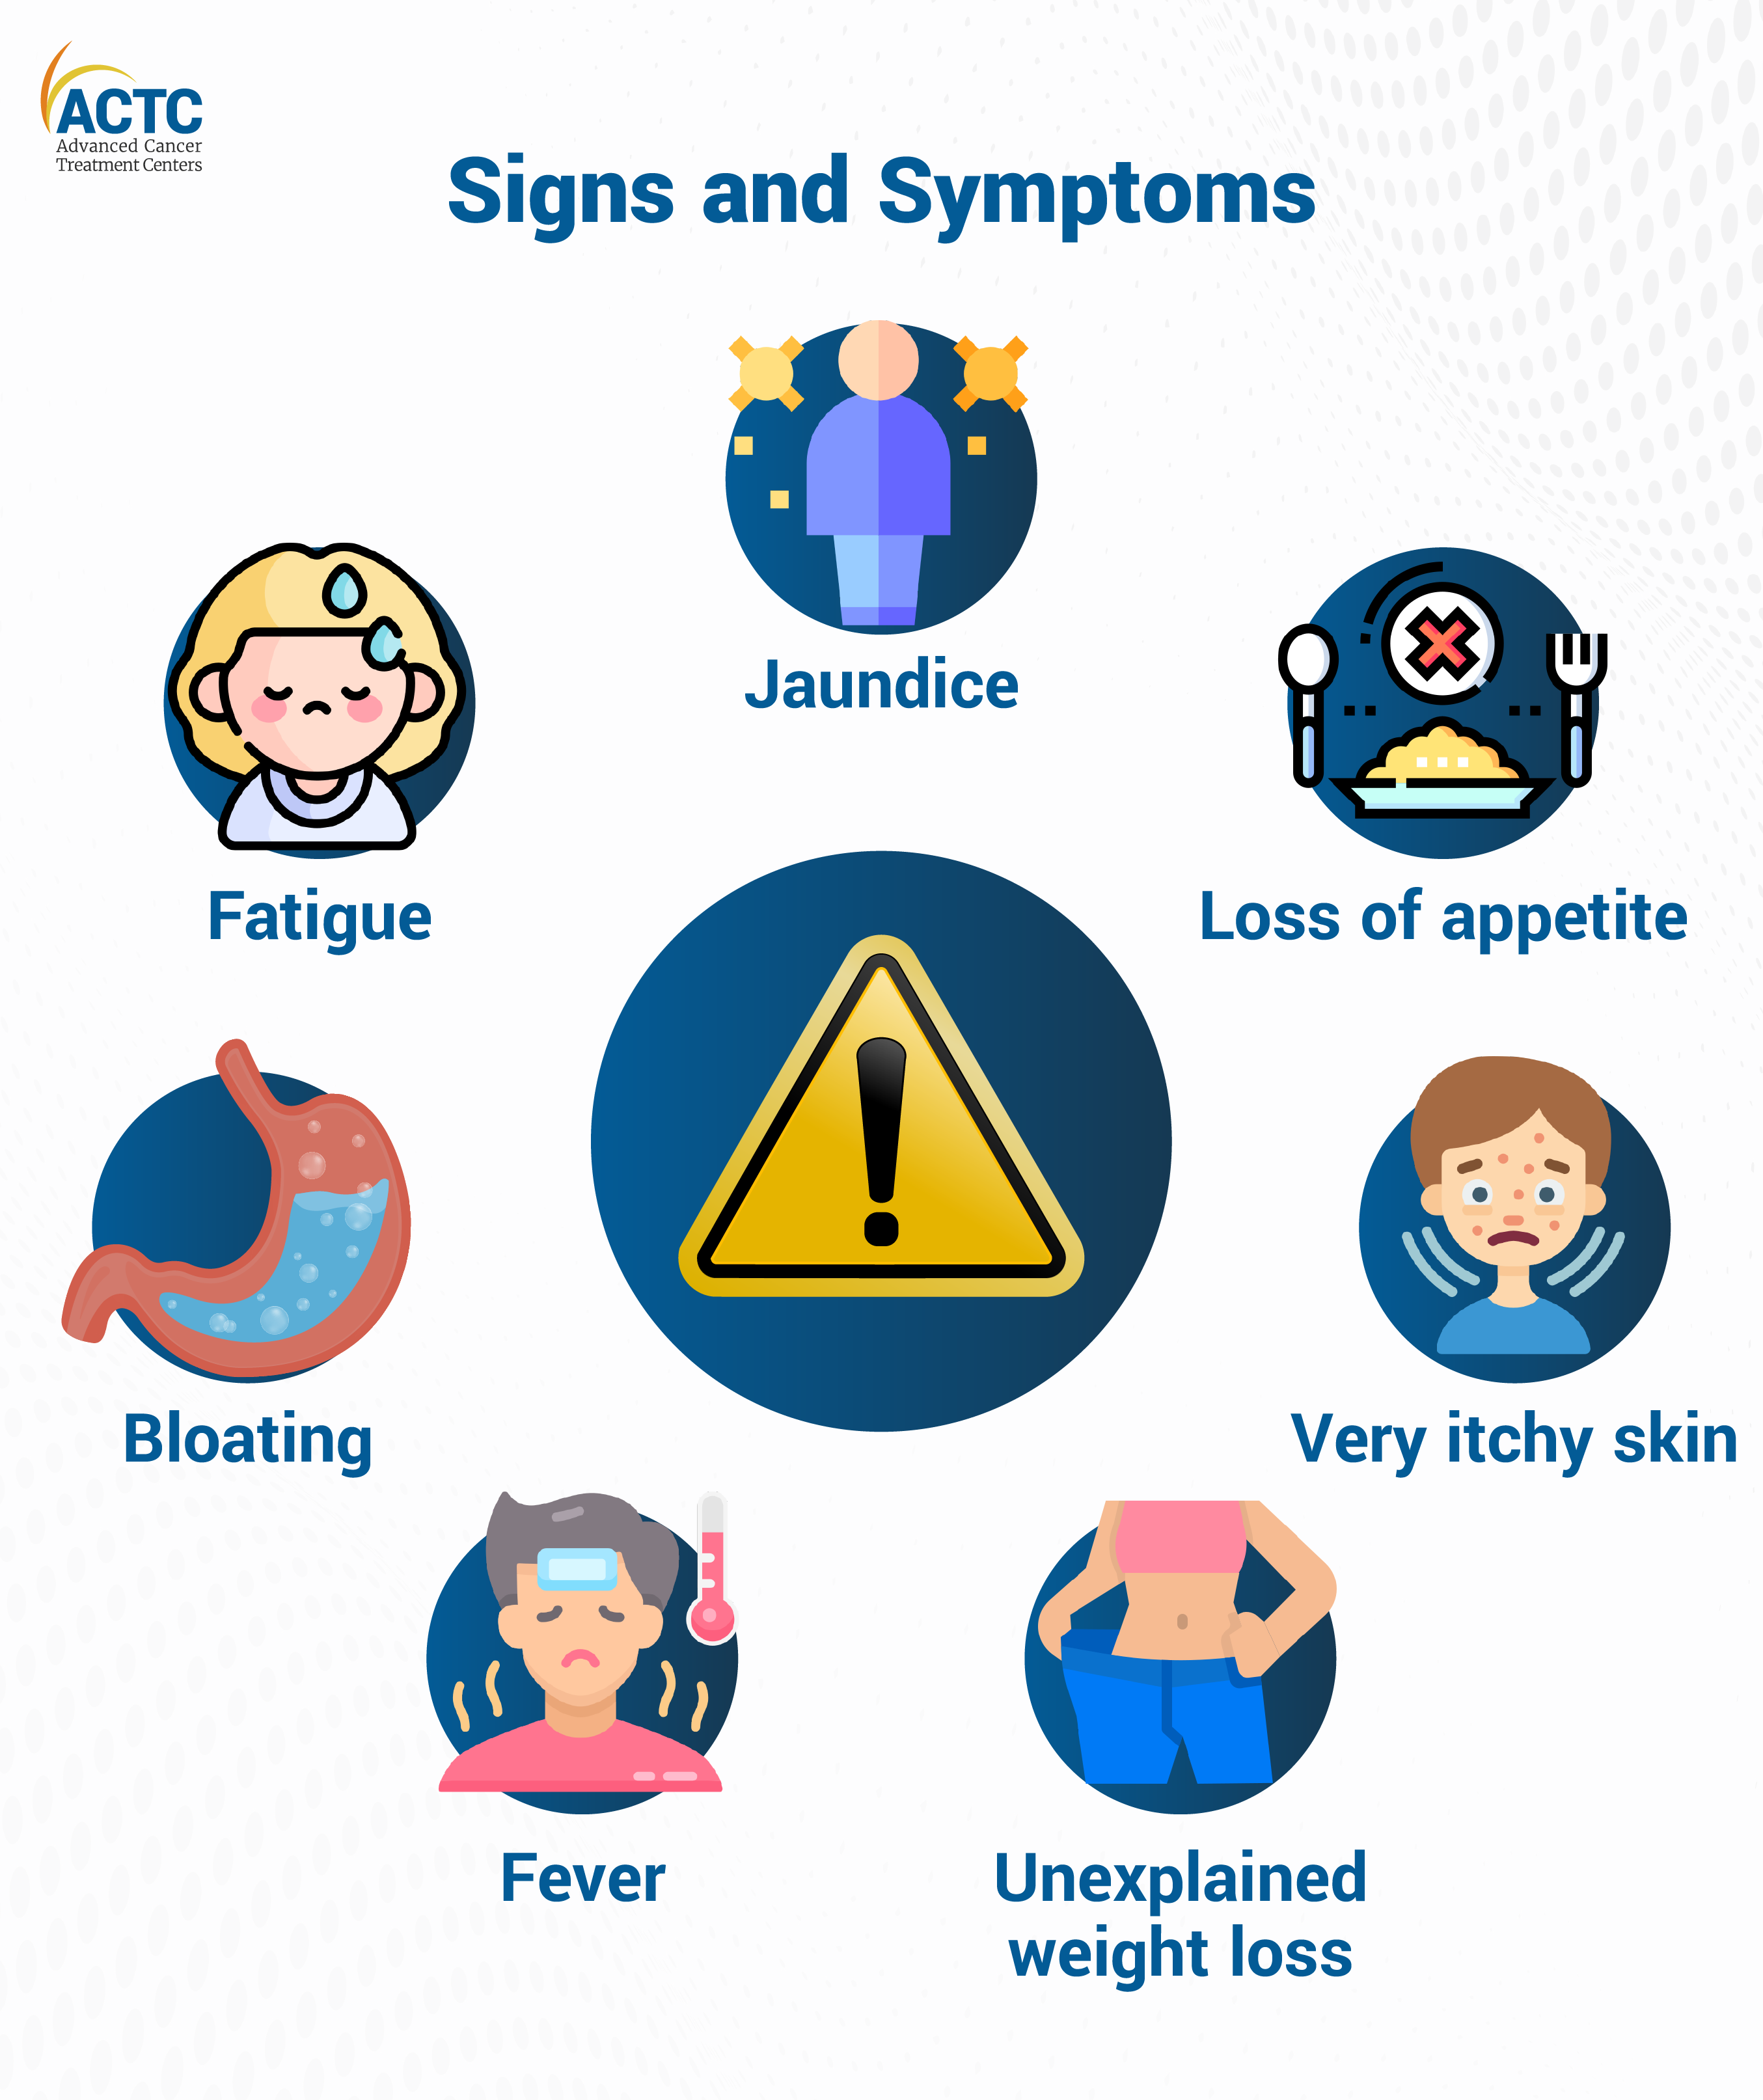 Signs and Symptoms of cholangiocarcinoma